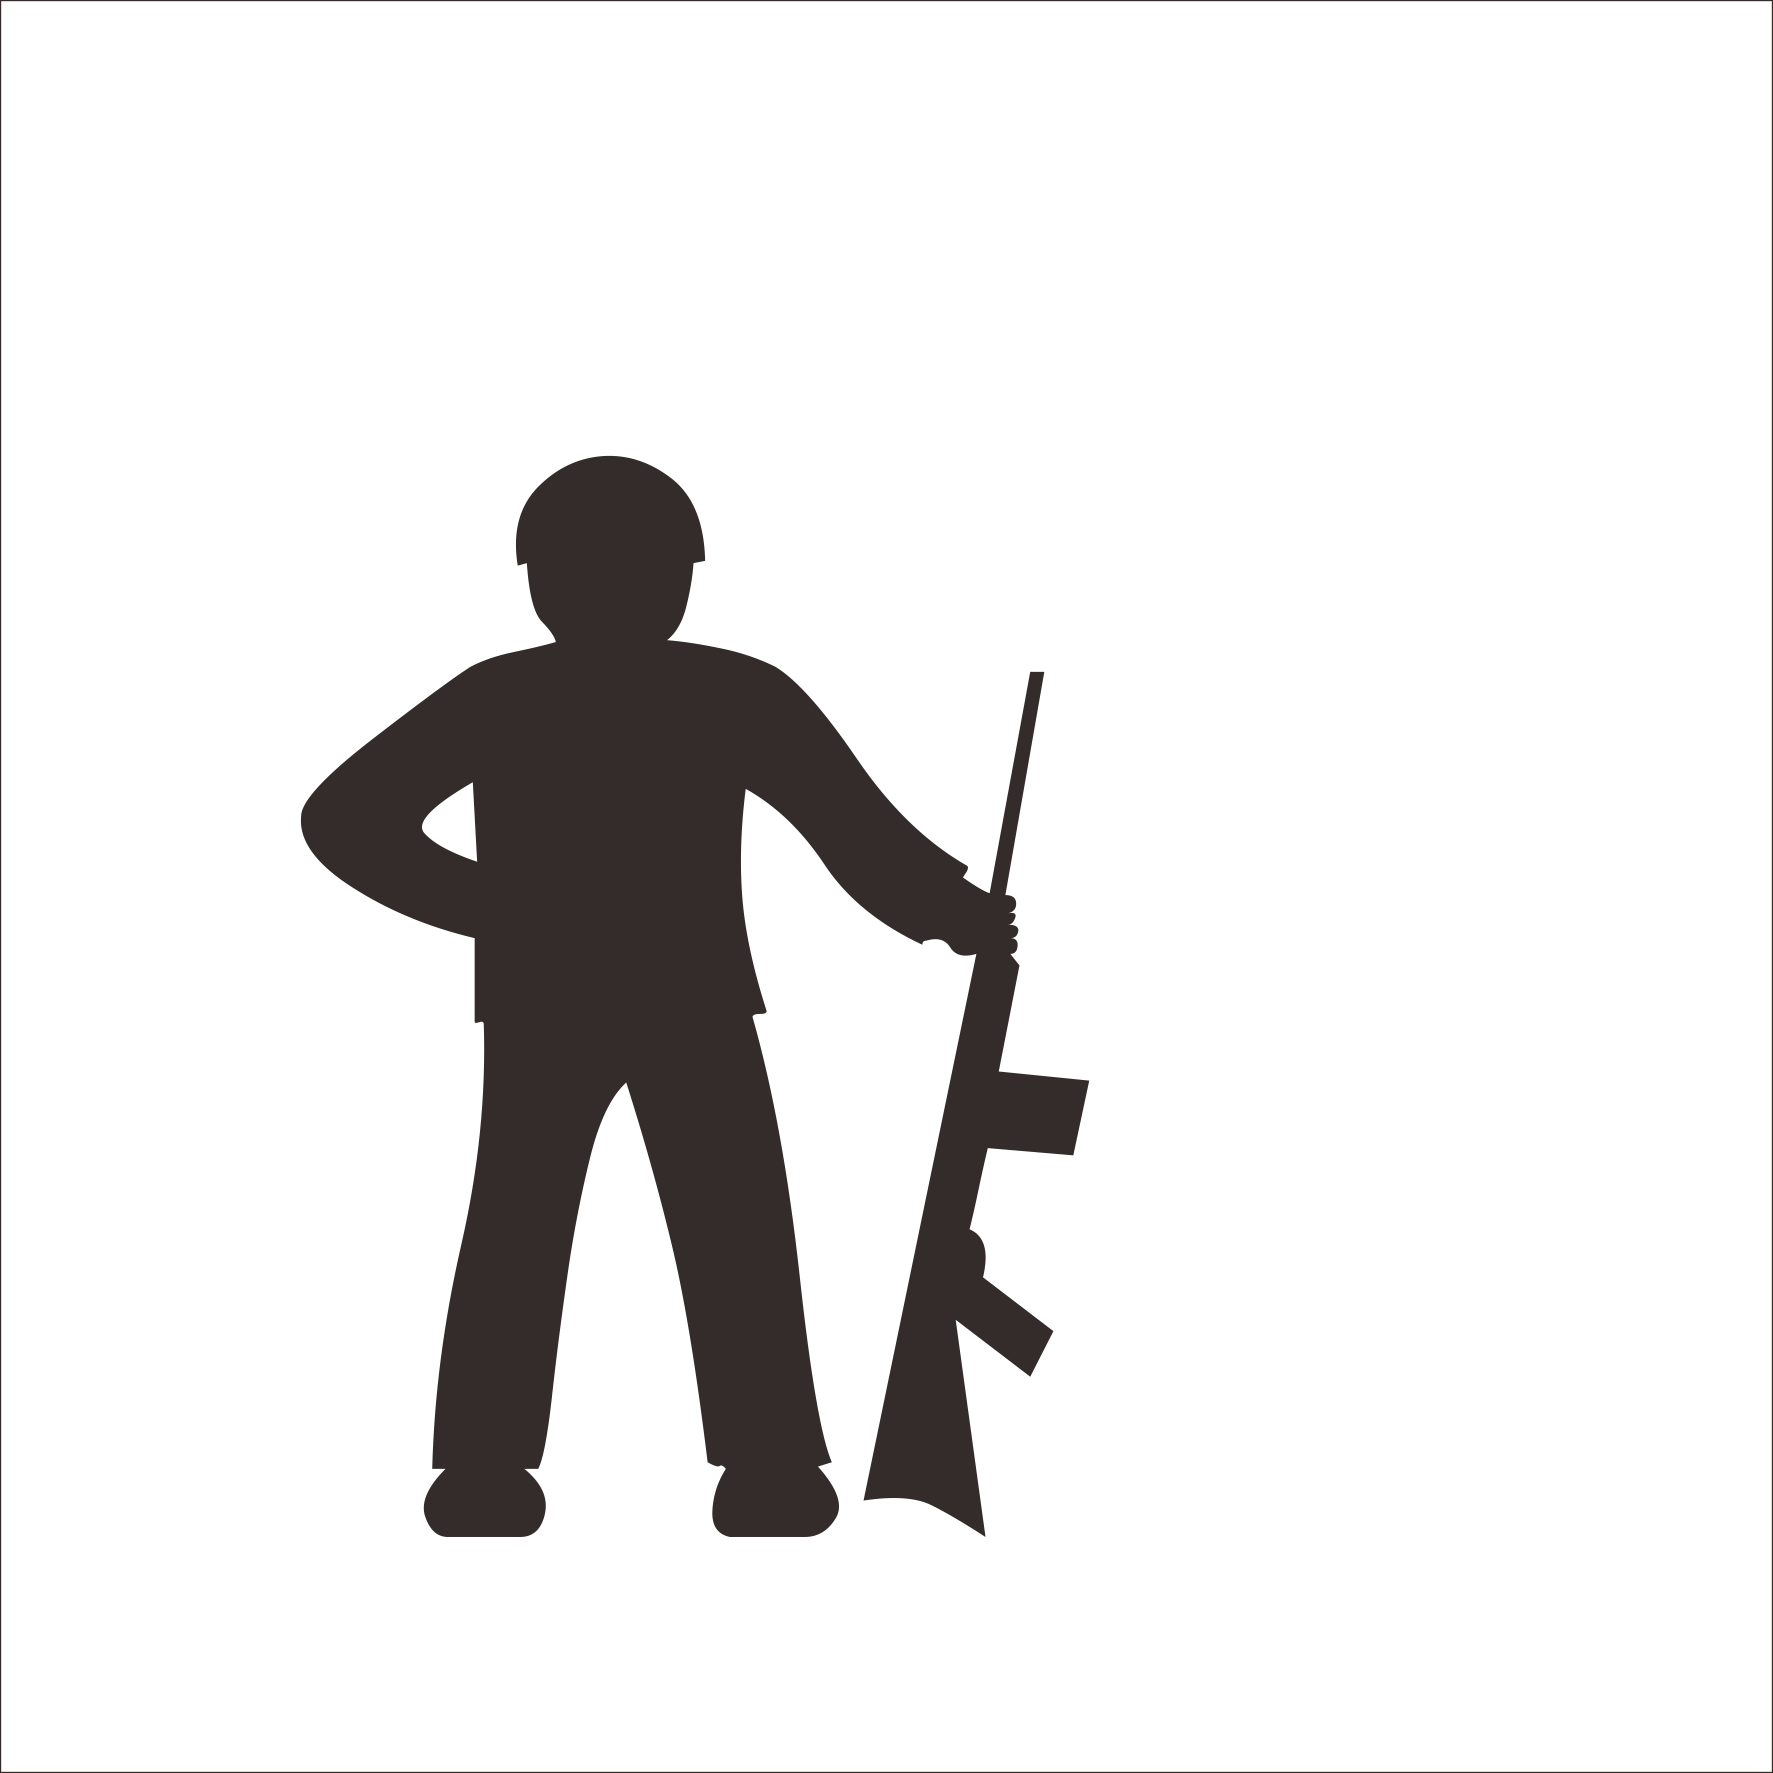 Soldier Download Serious Iron  Soldiers png download